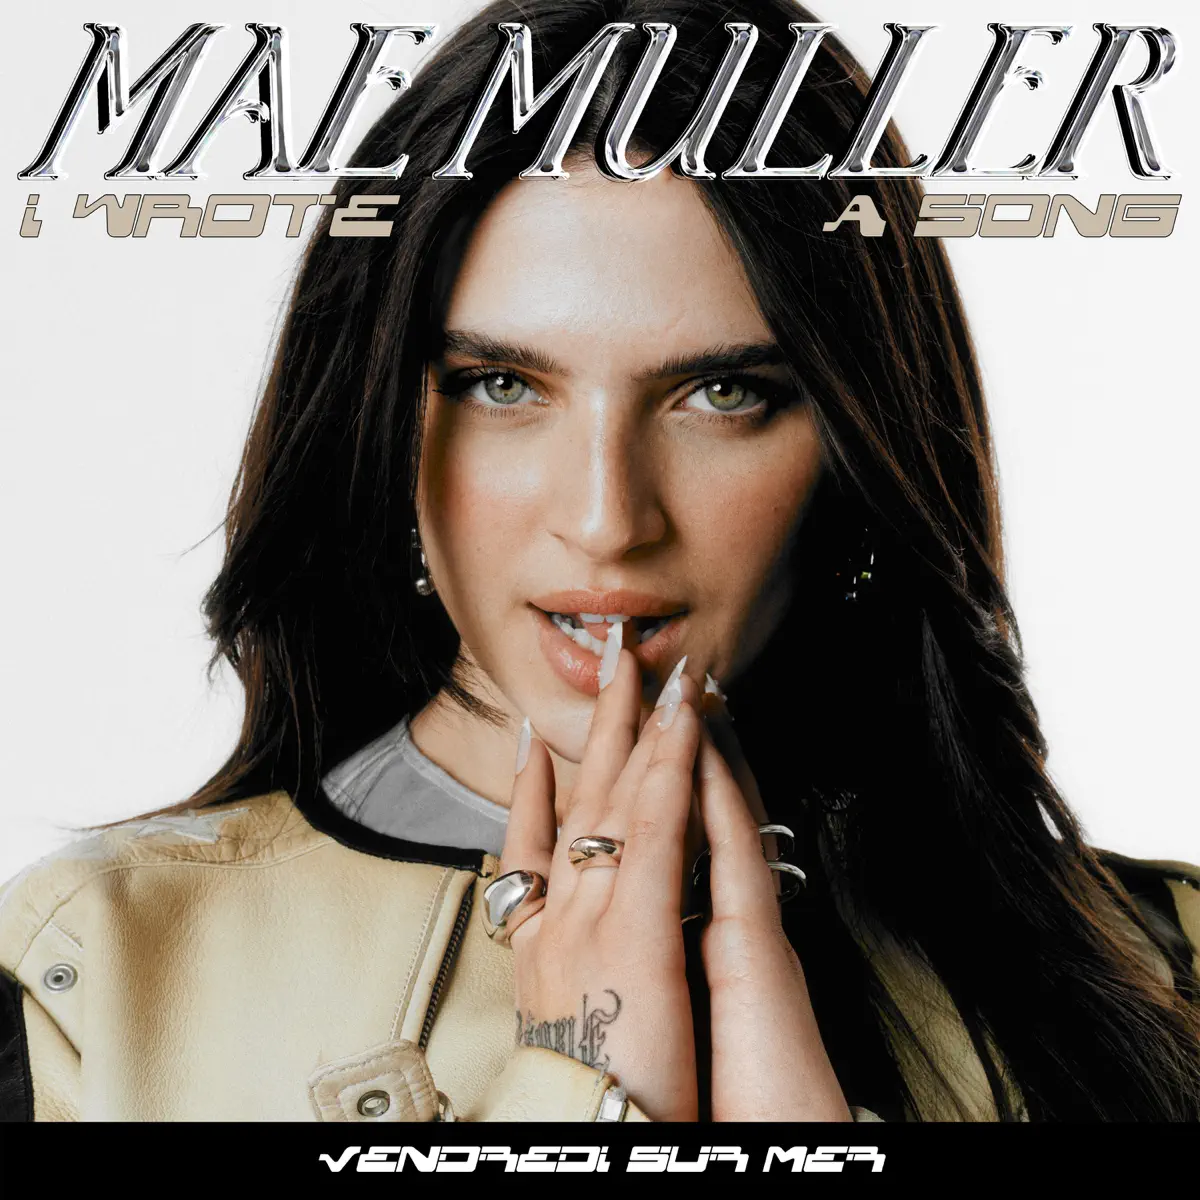 Mae Muller & Vendredi sur Mer - I Wrote A Song - Single (2023) [iTunes Plus AAC M4A]-新房子